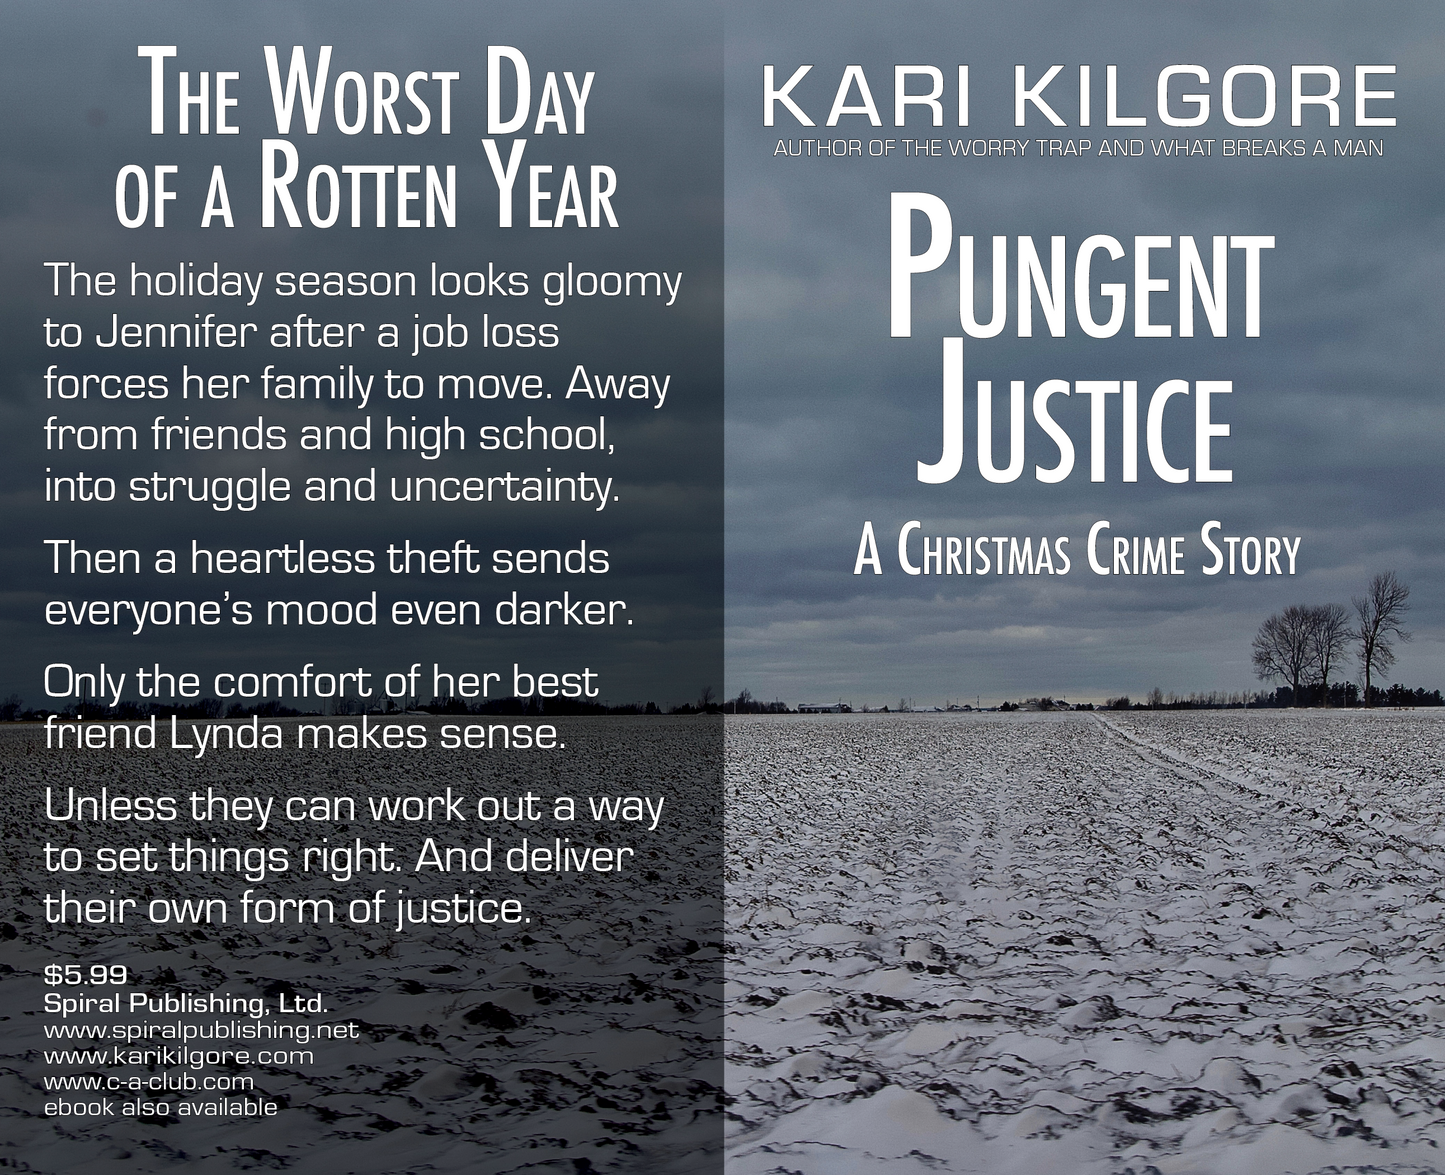 Pungent Justice: A Christmas Crime Story